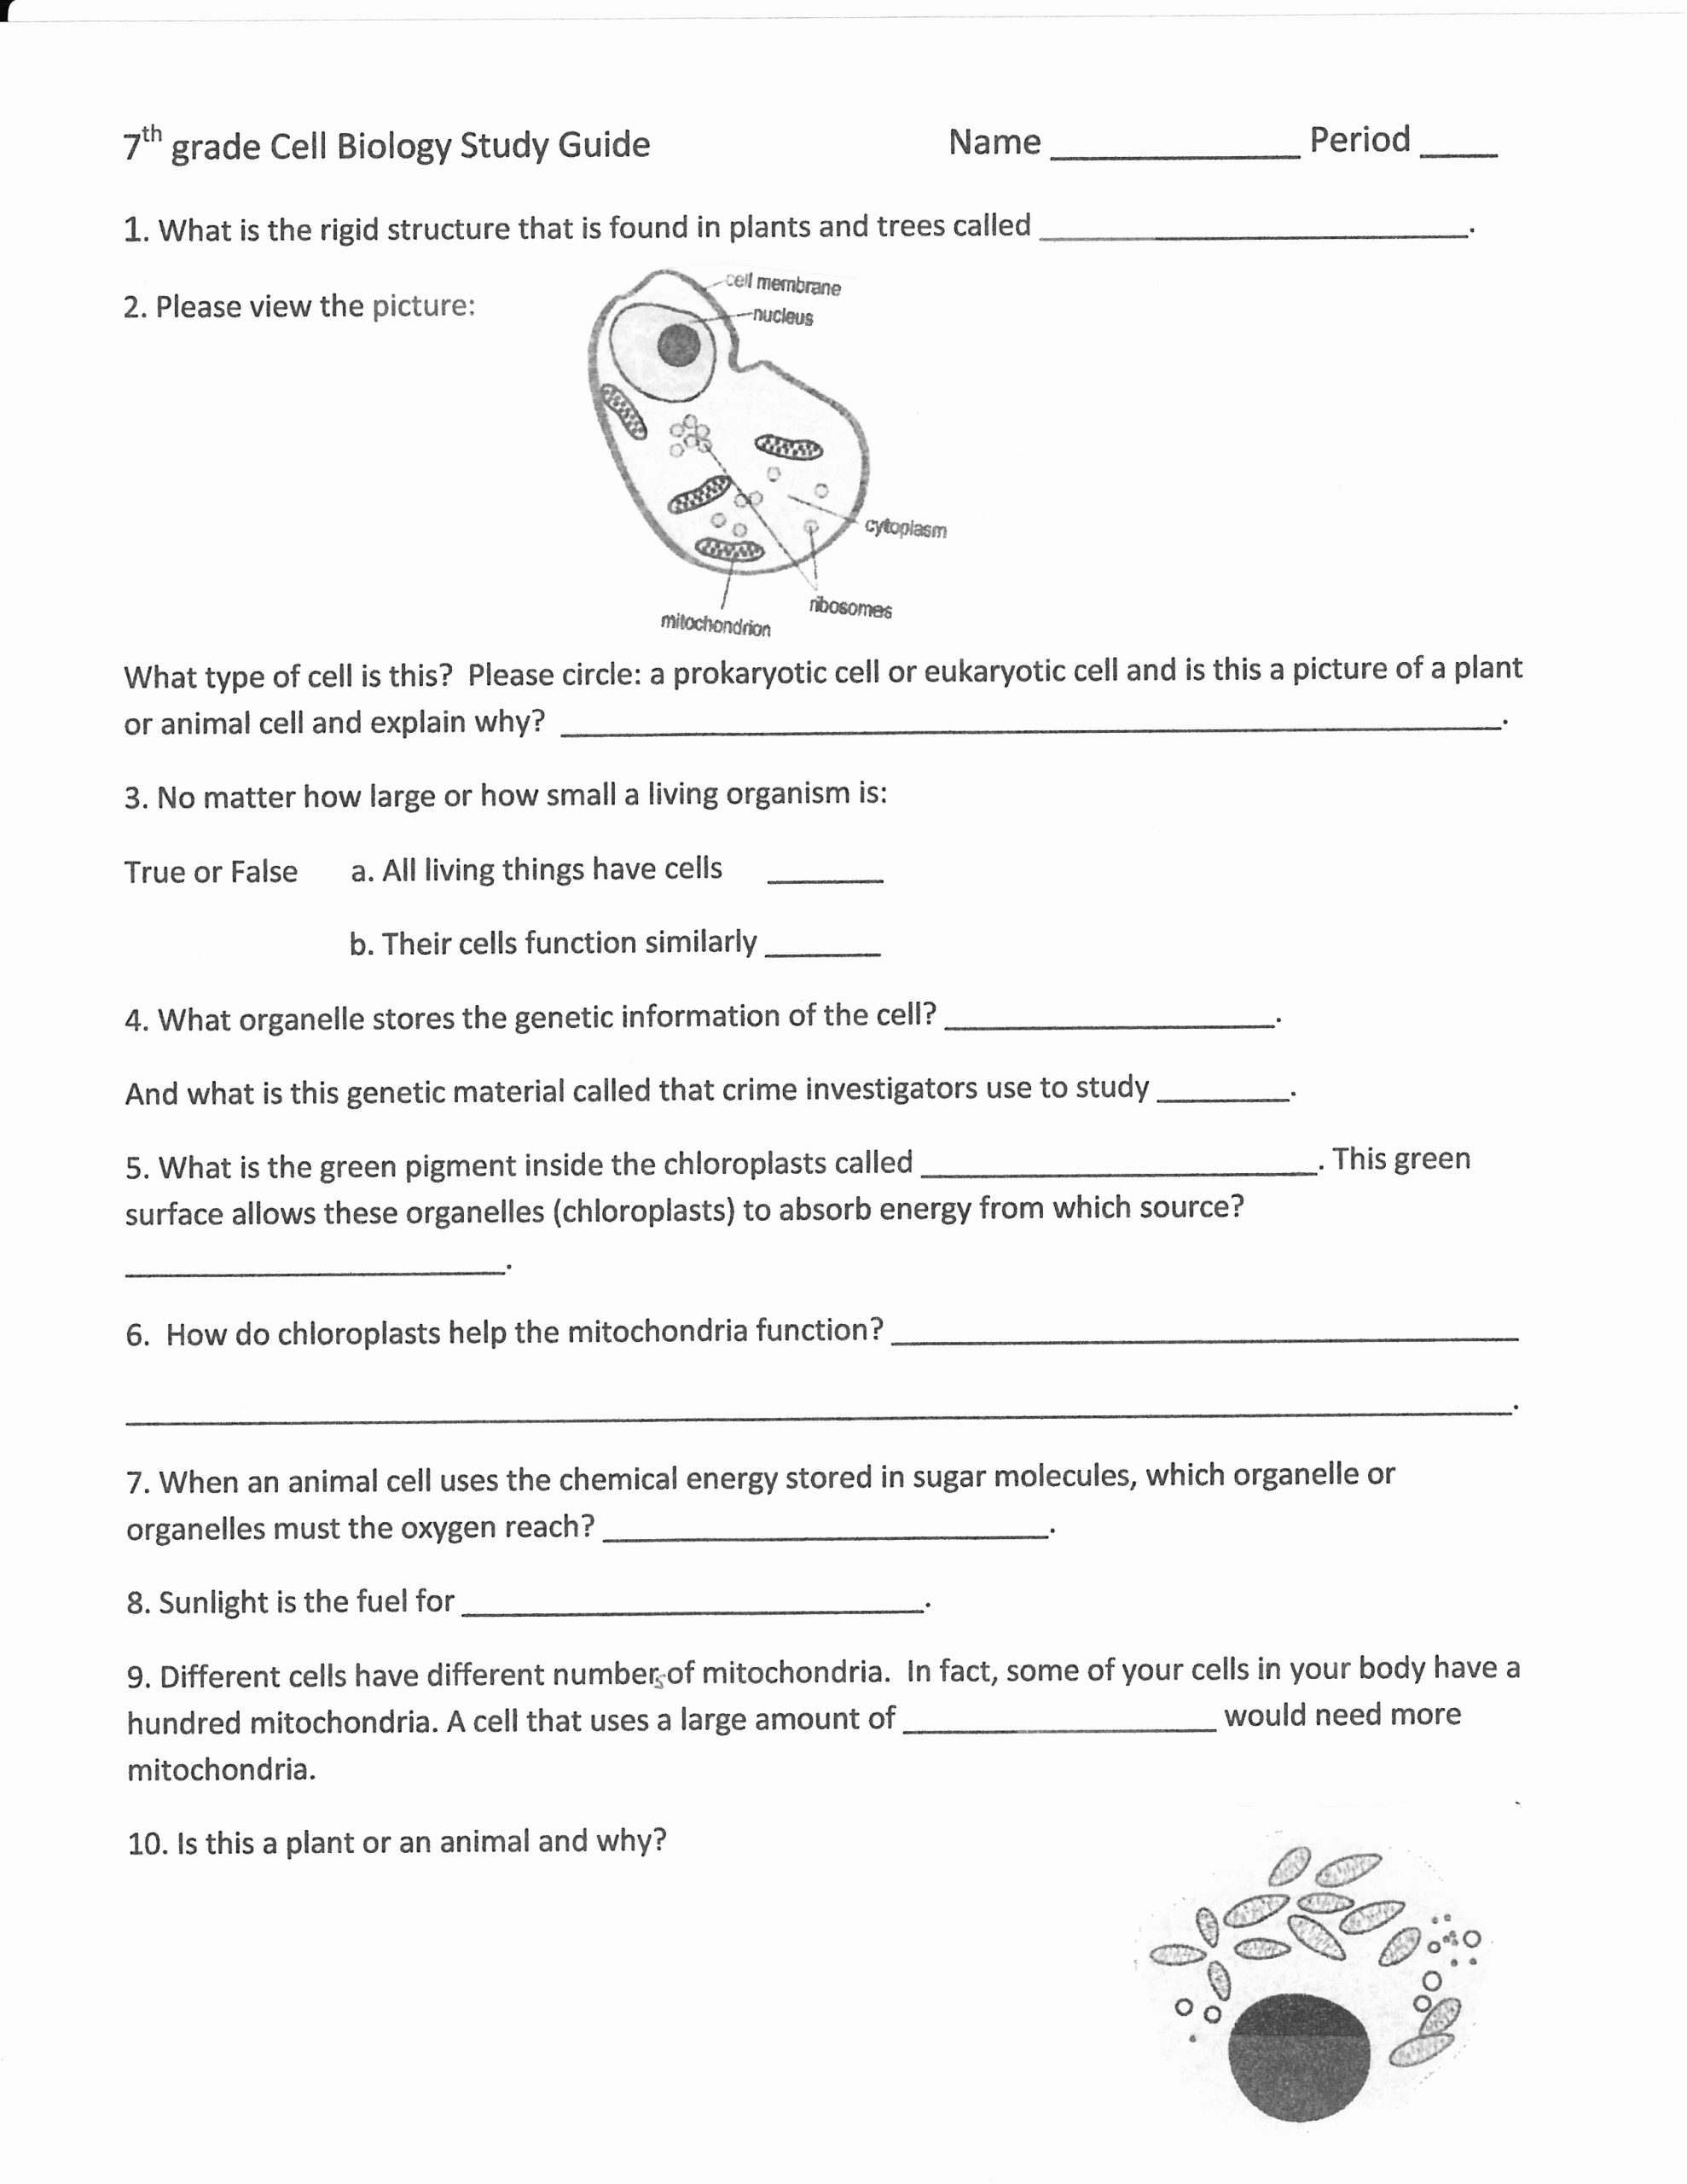 7th Grade Life Science Worksheets Fresh 13 Best Of 7th Grade Life Science Worksheets Free